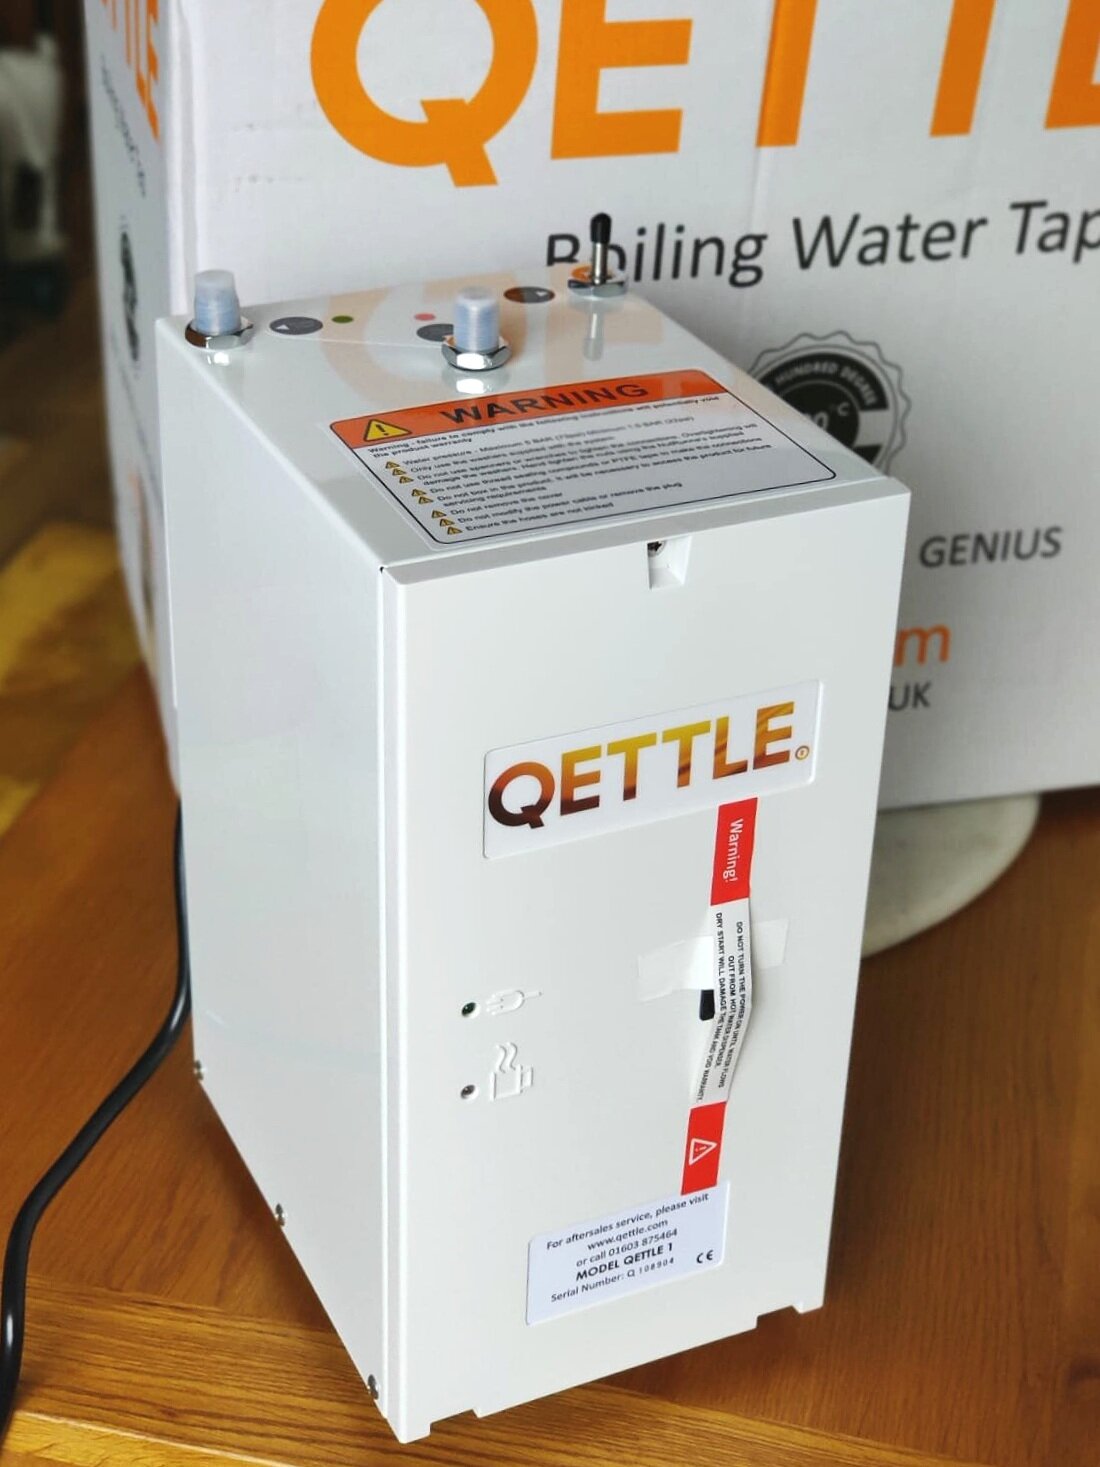 Qettle boiling water tap in the box